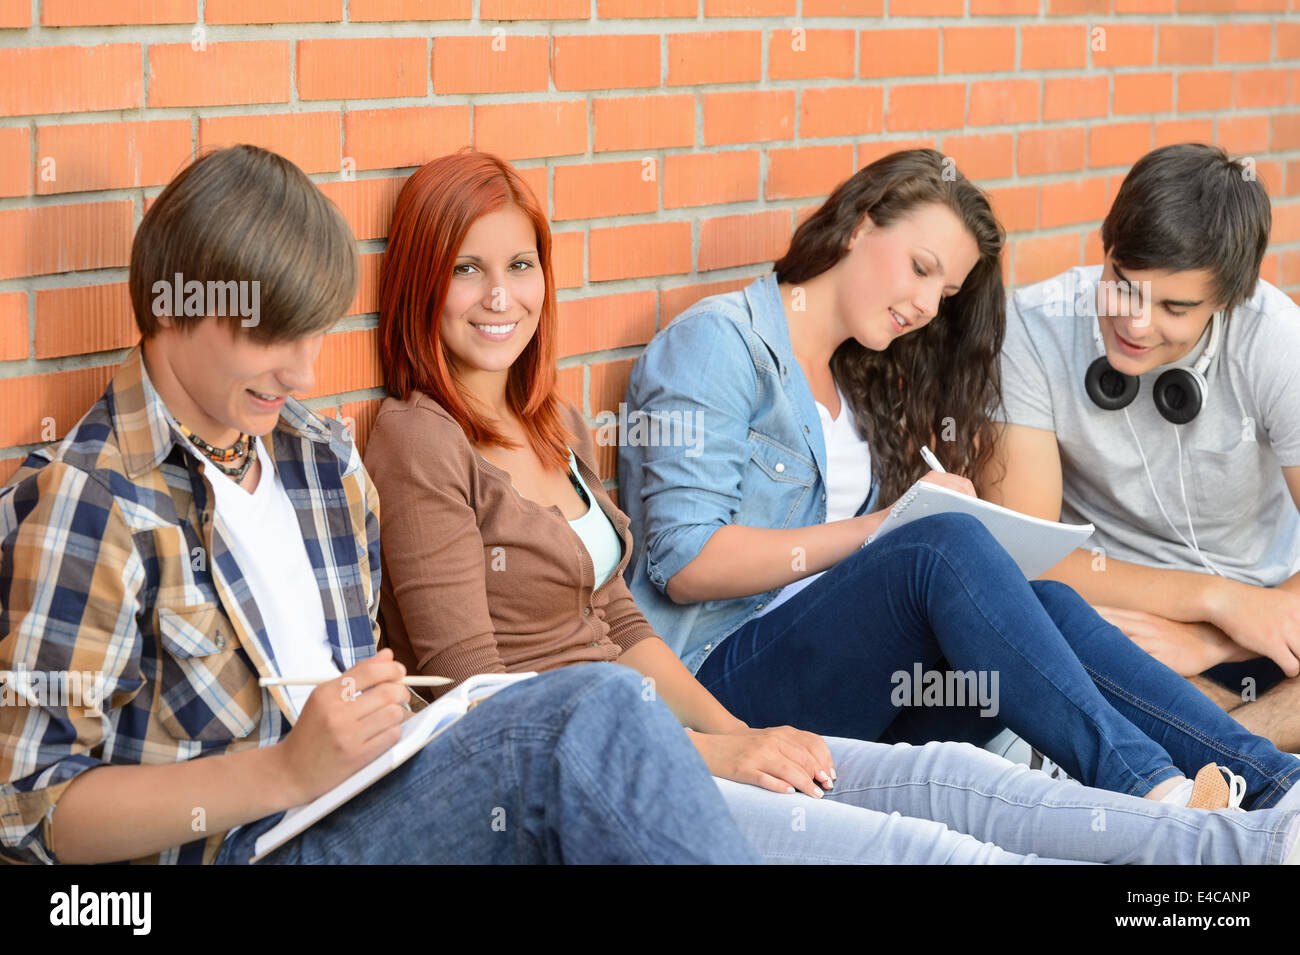 College students sitting in row against brick wall writing notes Banque D'Images